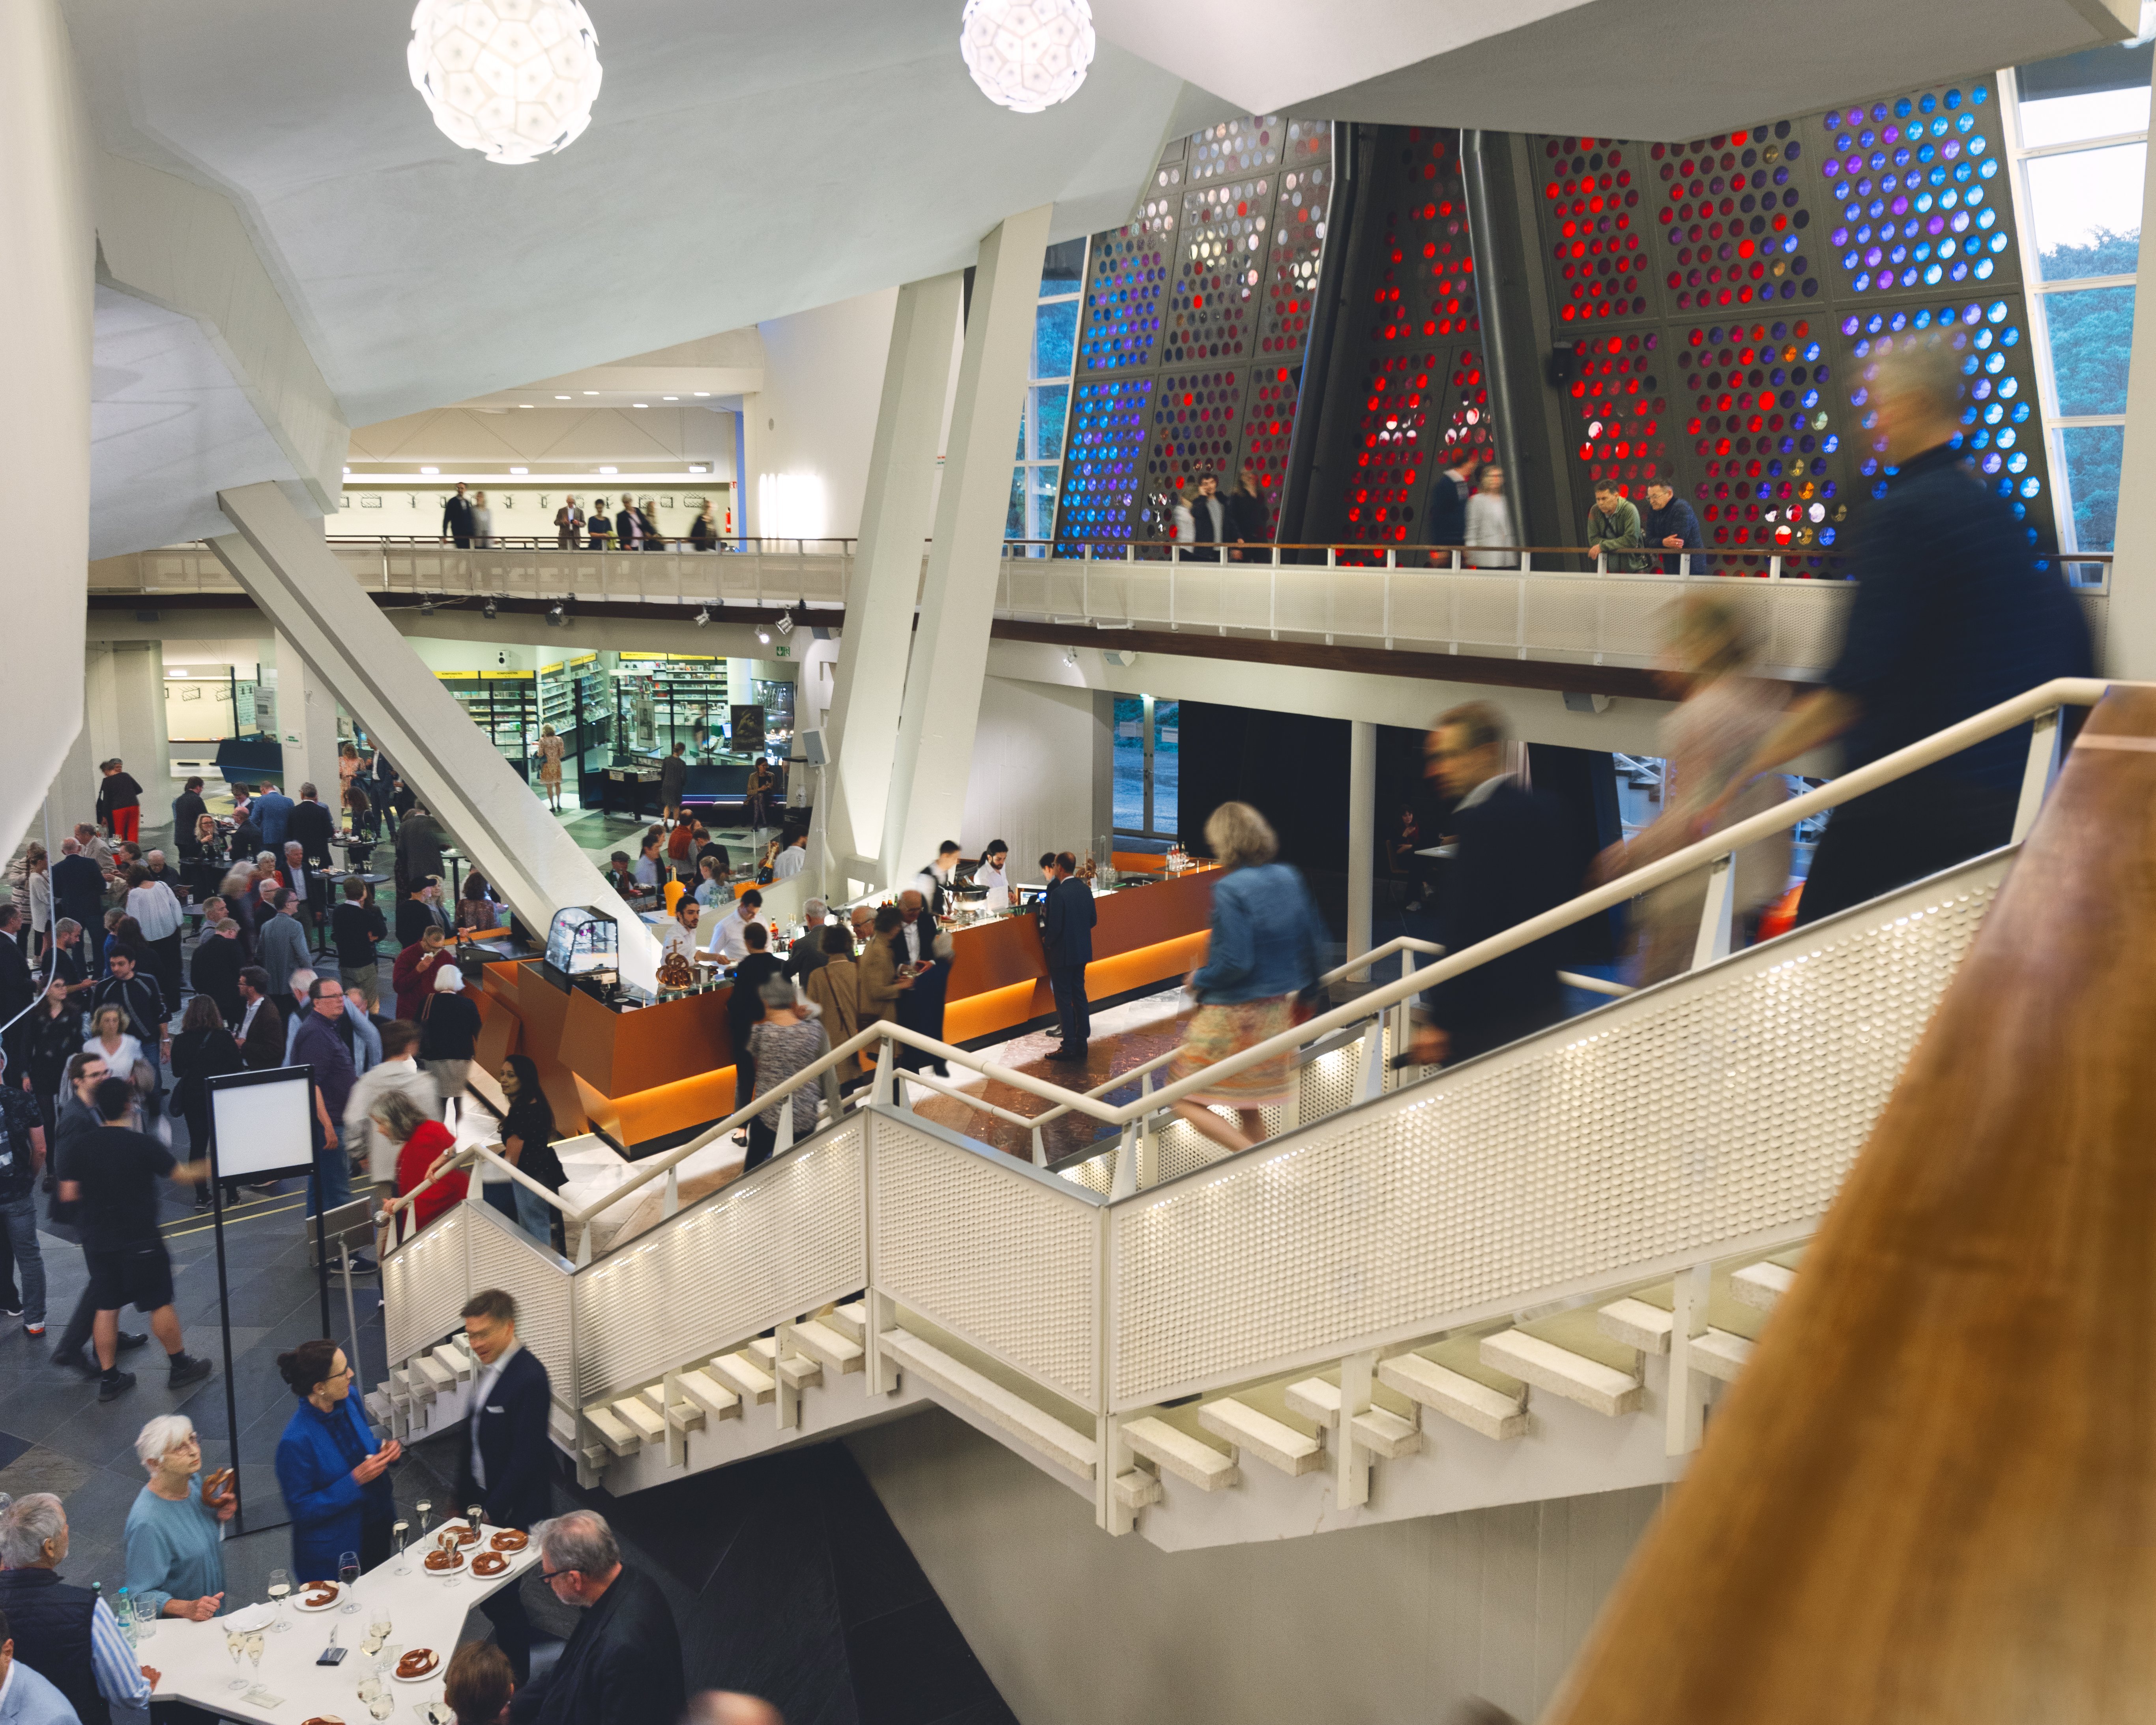 People in the foyer and on the stairs of the Philharmonie Berlin